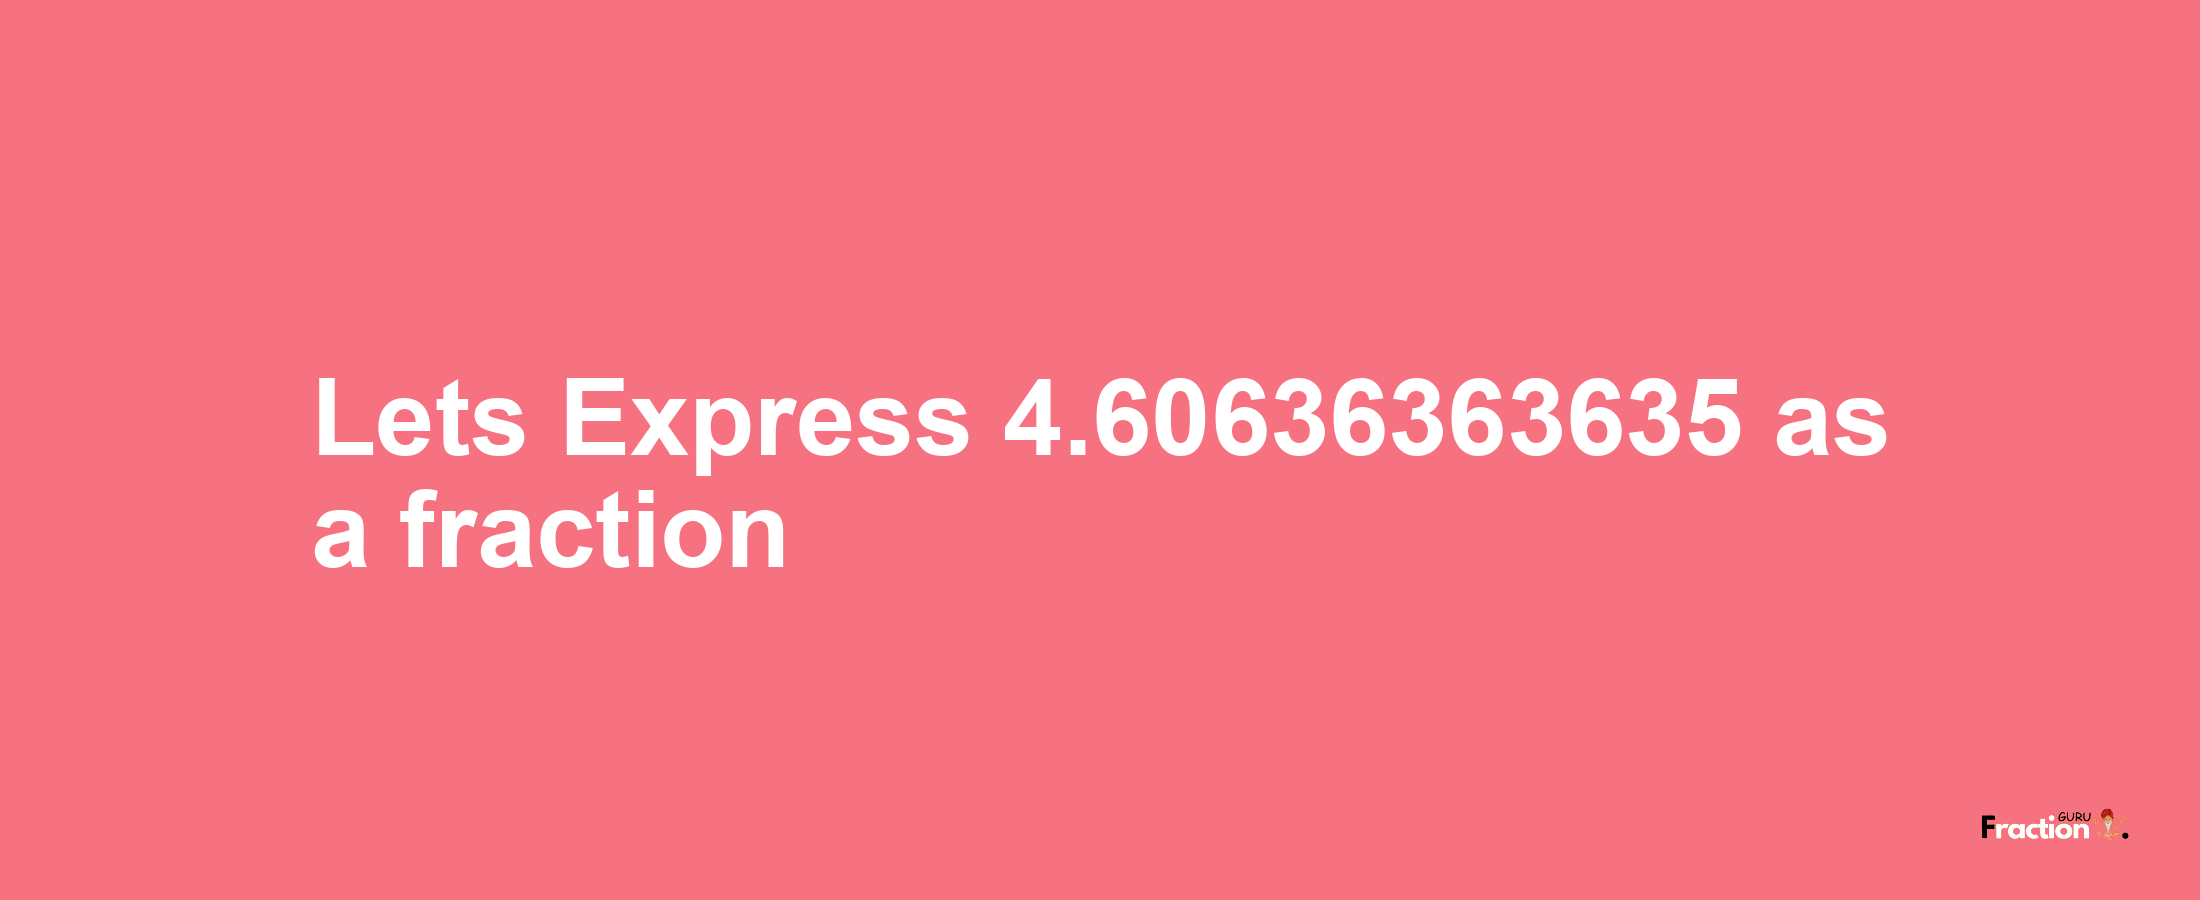 Lets Express 4.60636363635 as afraction